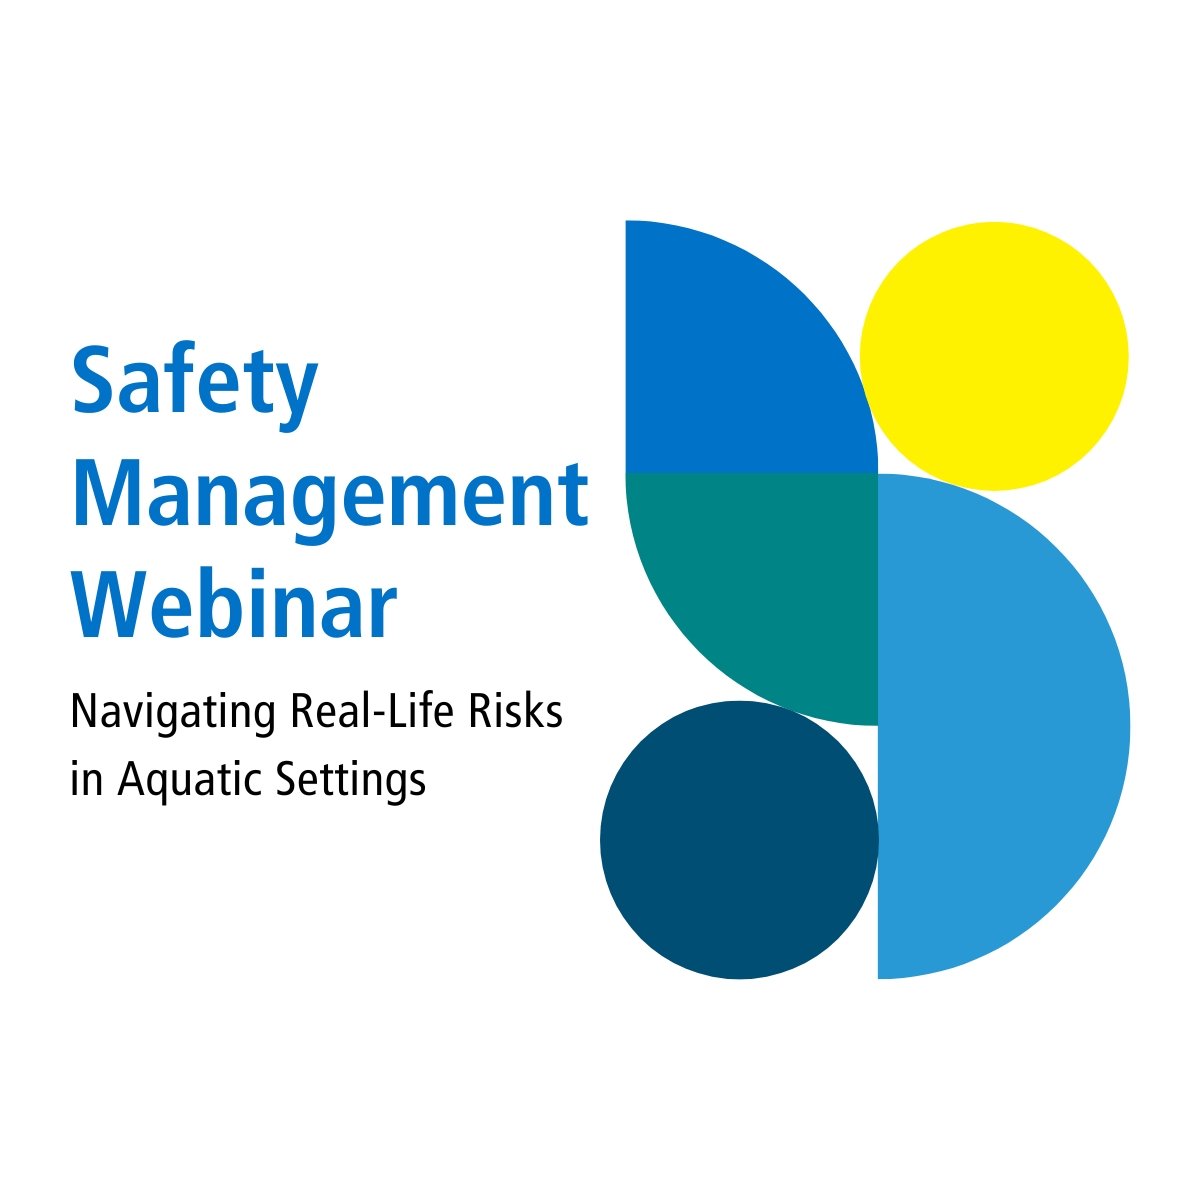 It’s not all fun and games in the water. If you work in an aquatic setting, you need to be prepared for anything. Join our Safety Standards VP Gary Sanger as he looks at real situations. Register for this valuable May 16 #webinar today: ow.ly/Ms2Q50R1wXT | #SafetyMGMT